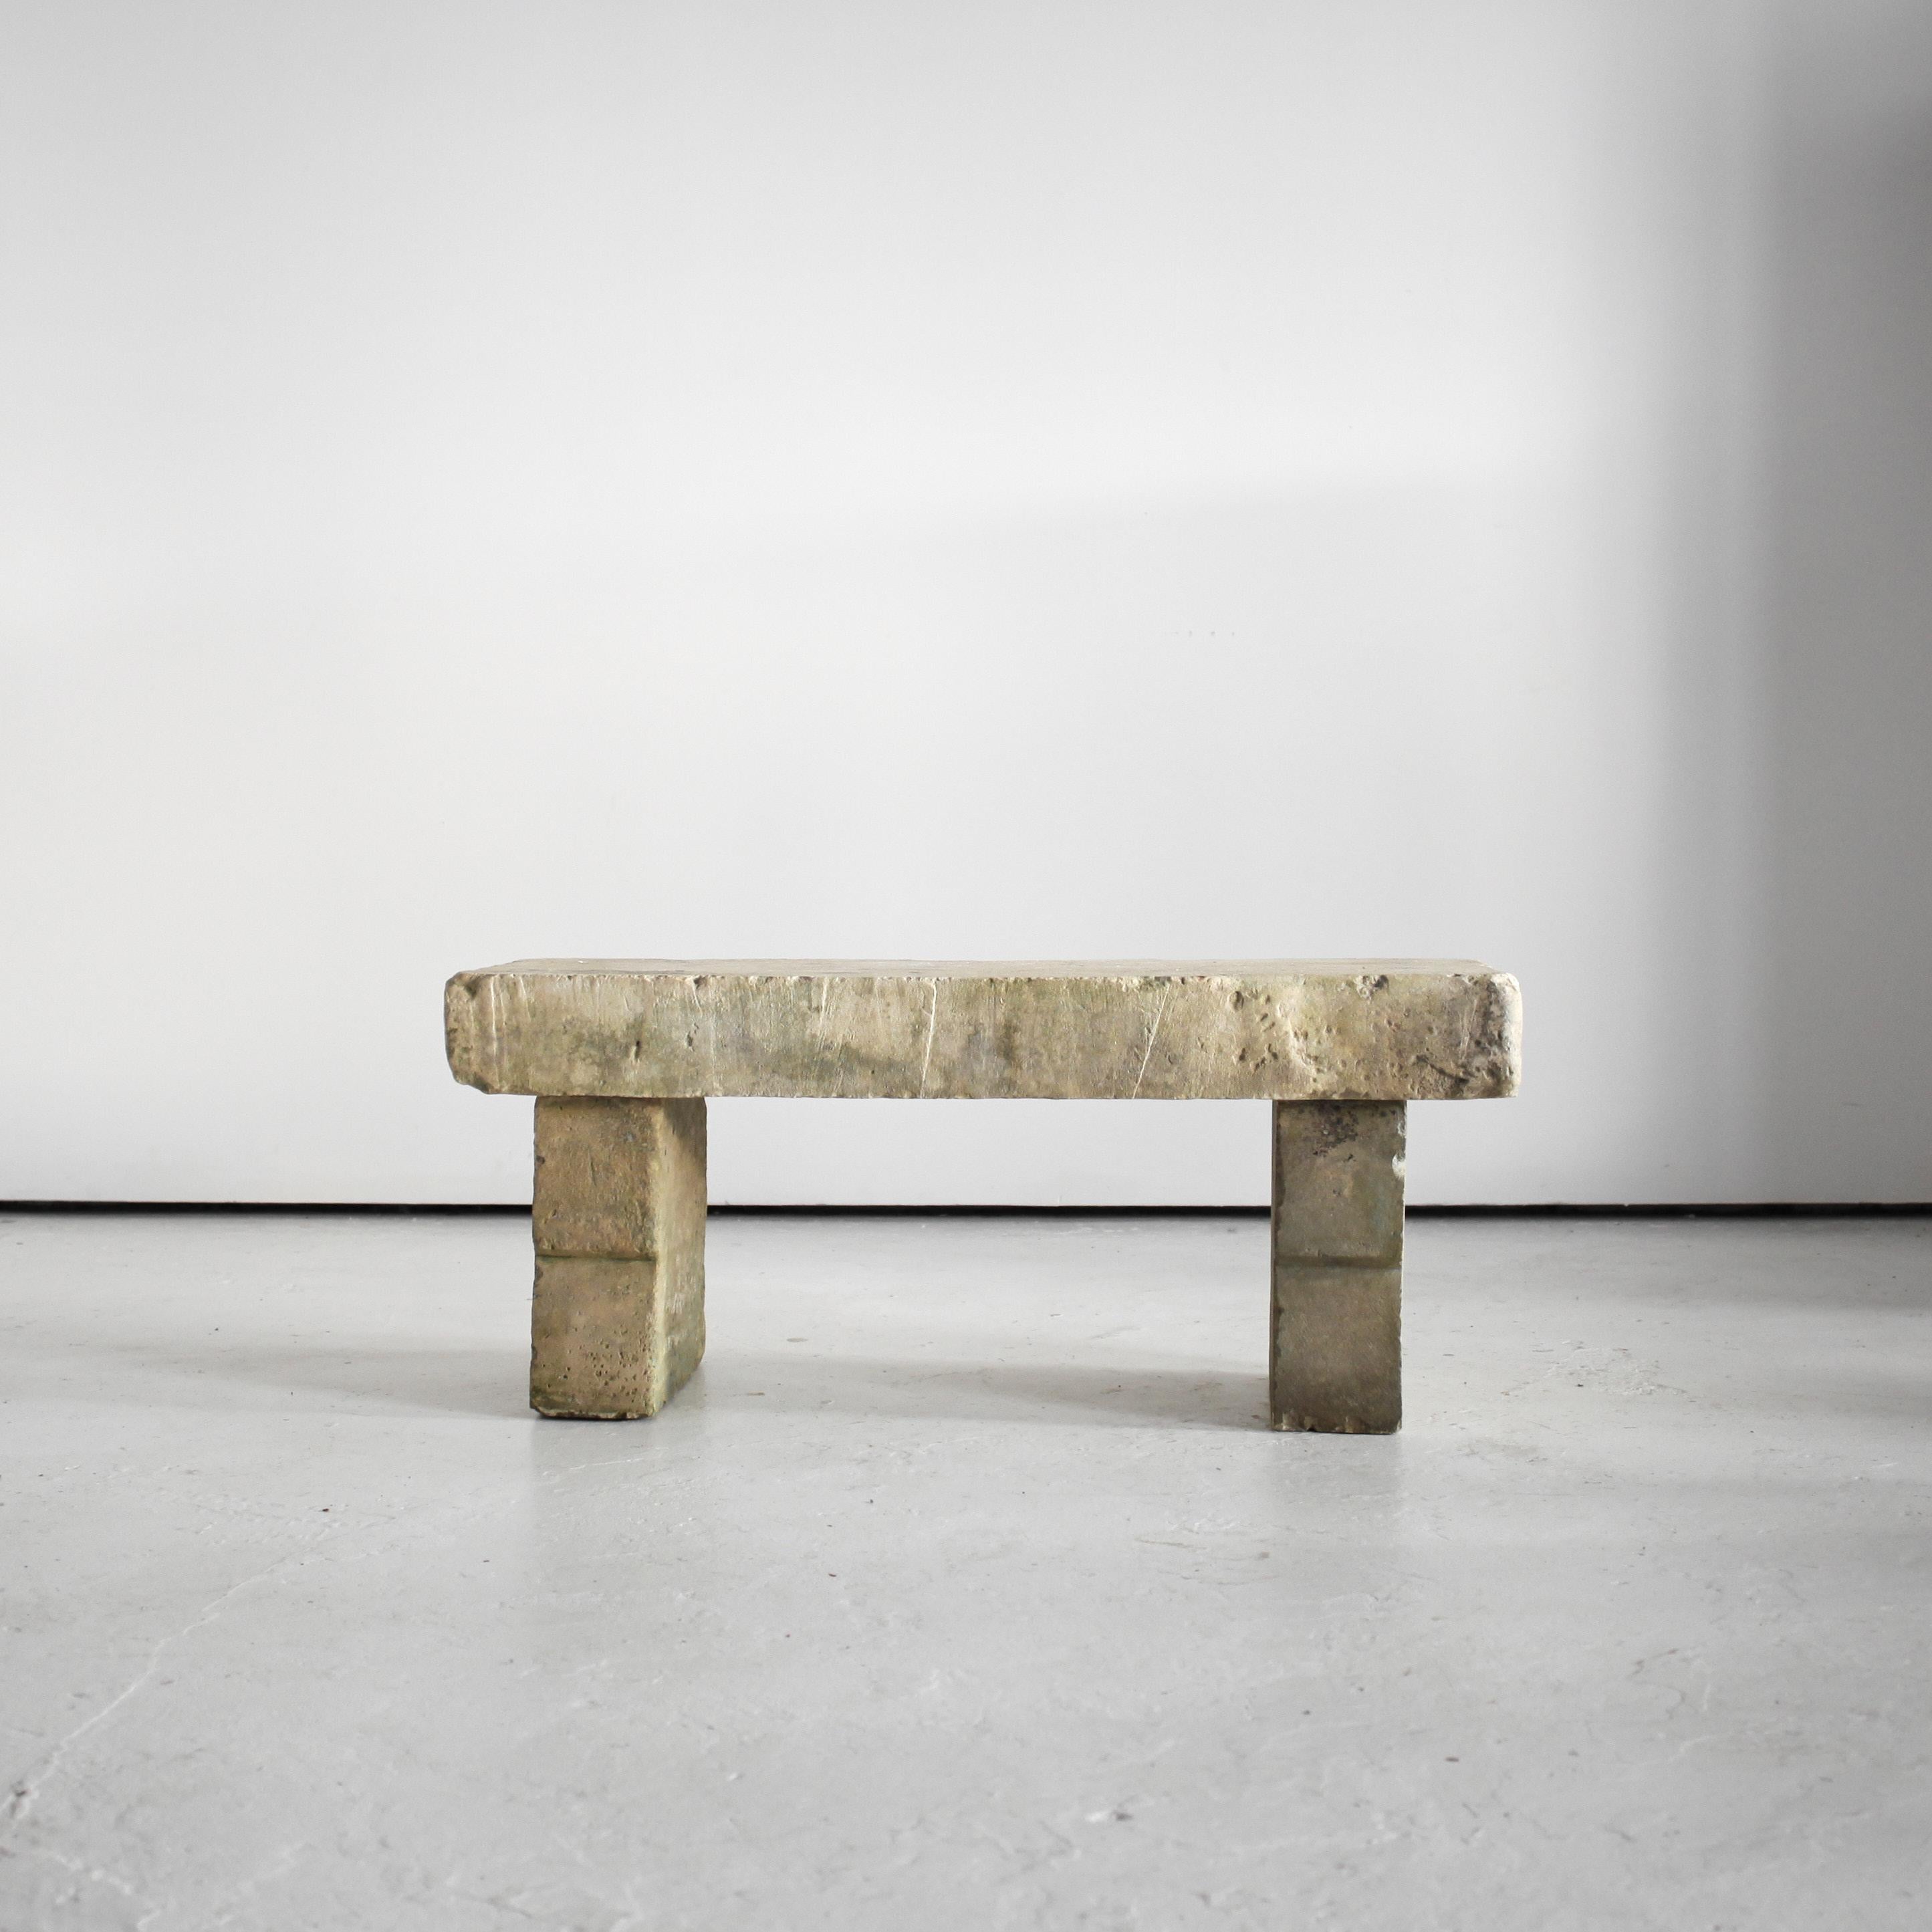 A French primitively carved “tuffeau” stone bench from the Loire valley.

Constructed simply from three thick slabs of local Loire stone with stepped detail to the two legs.